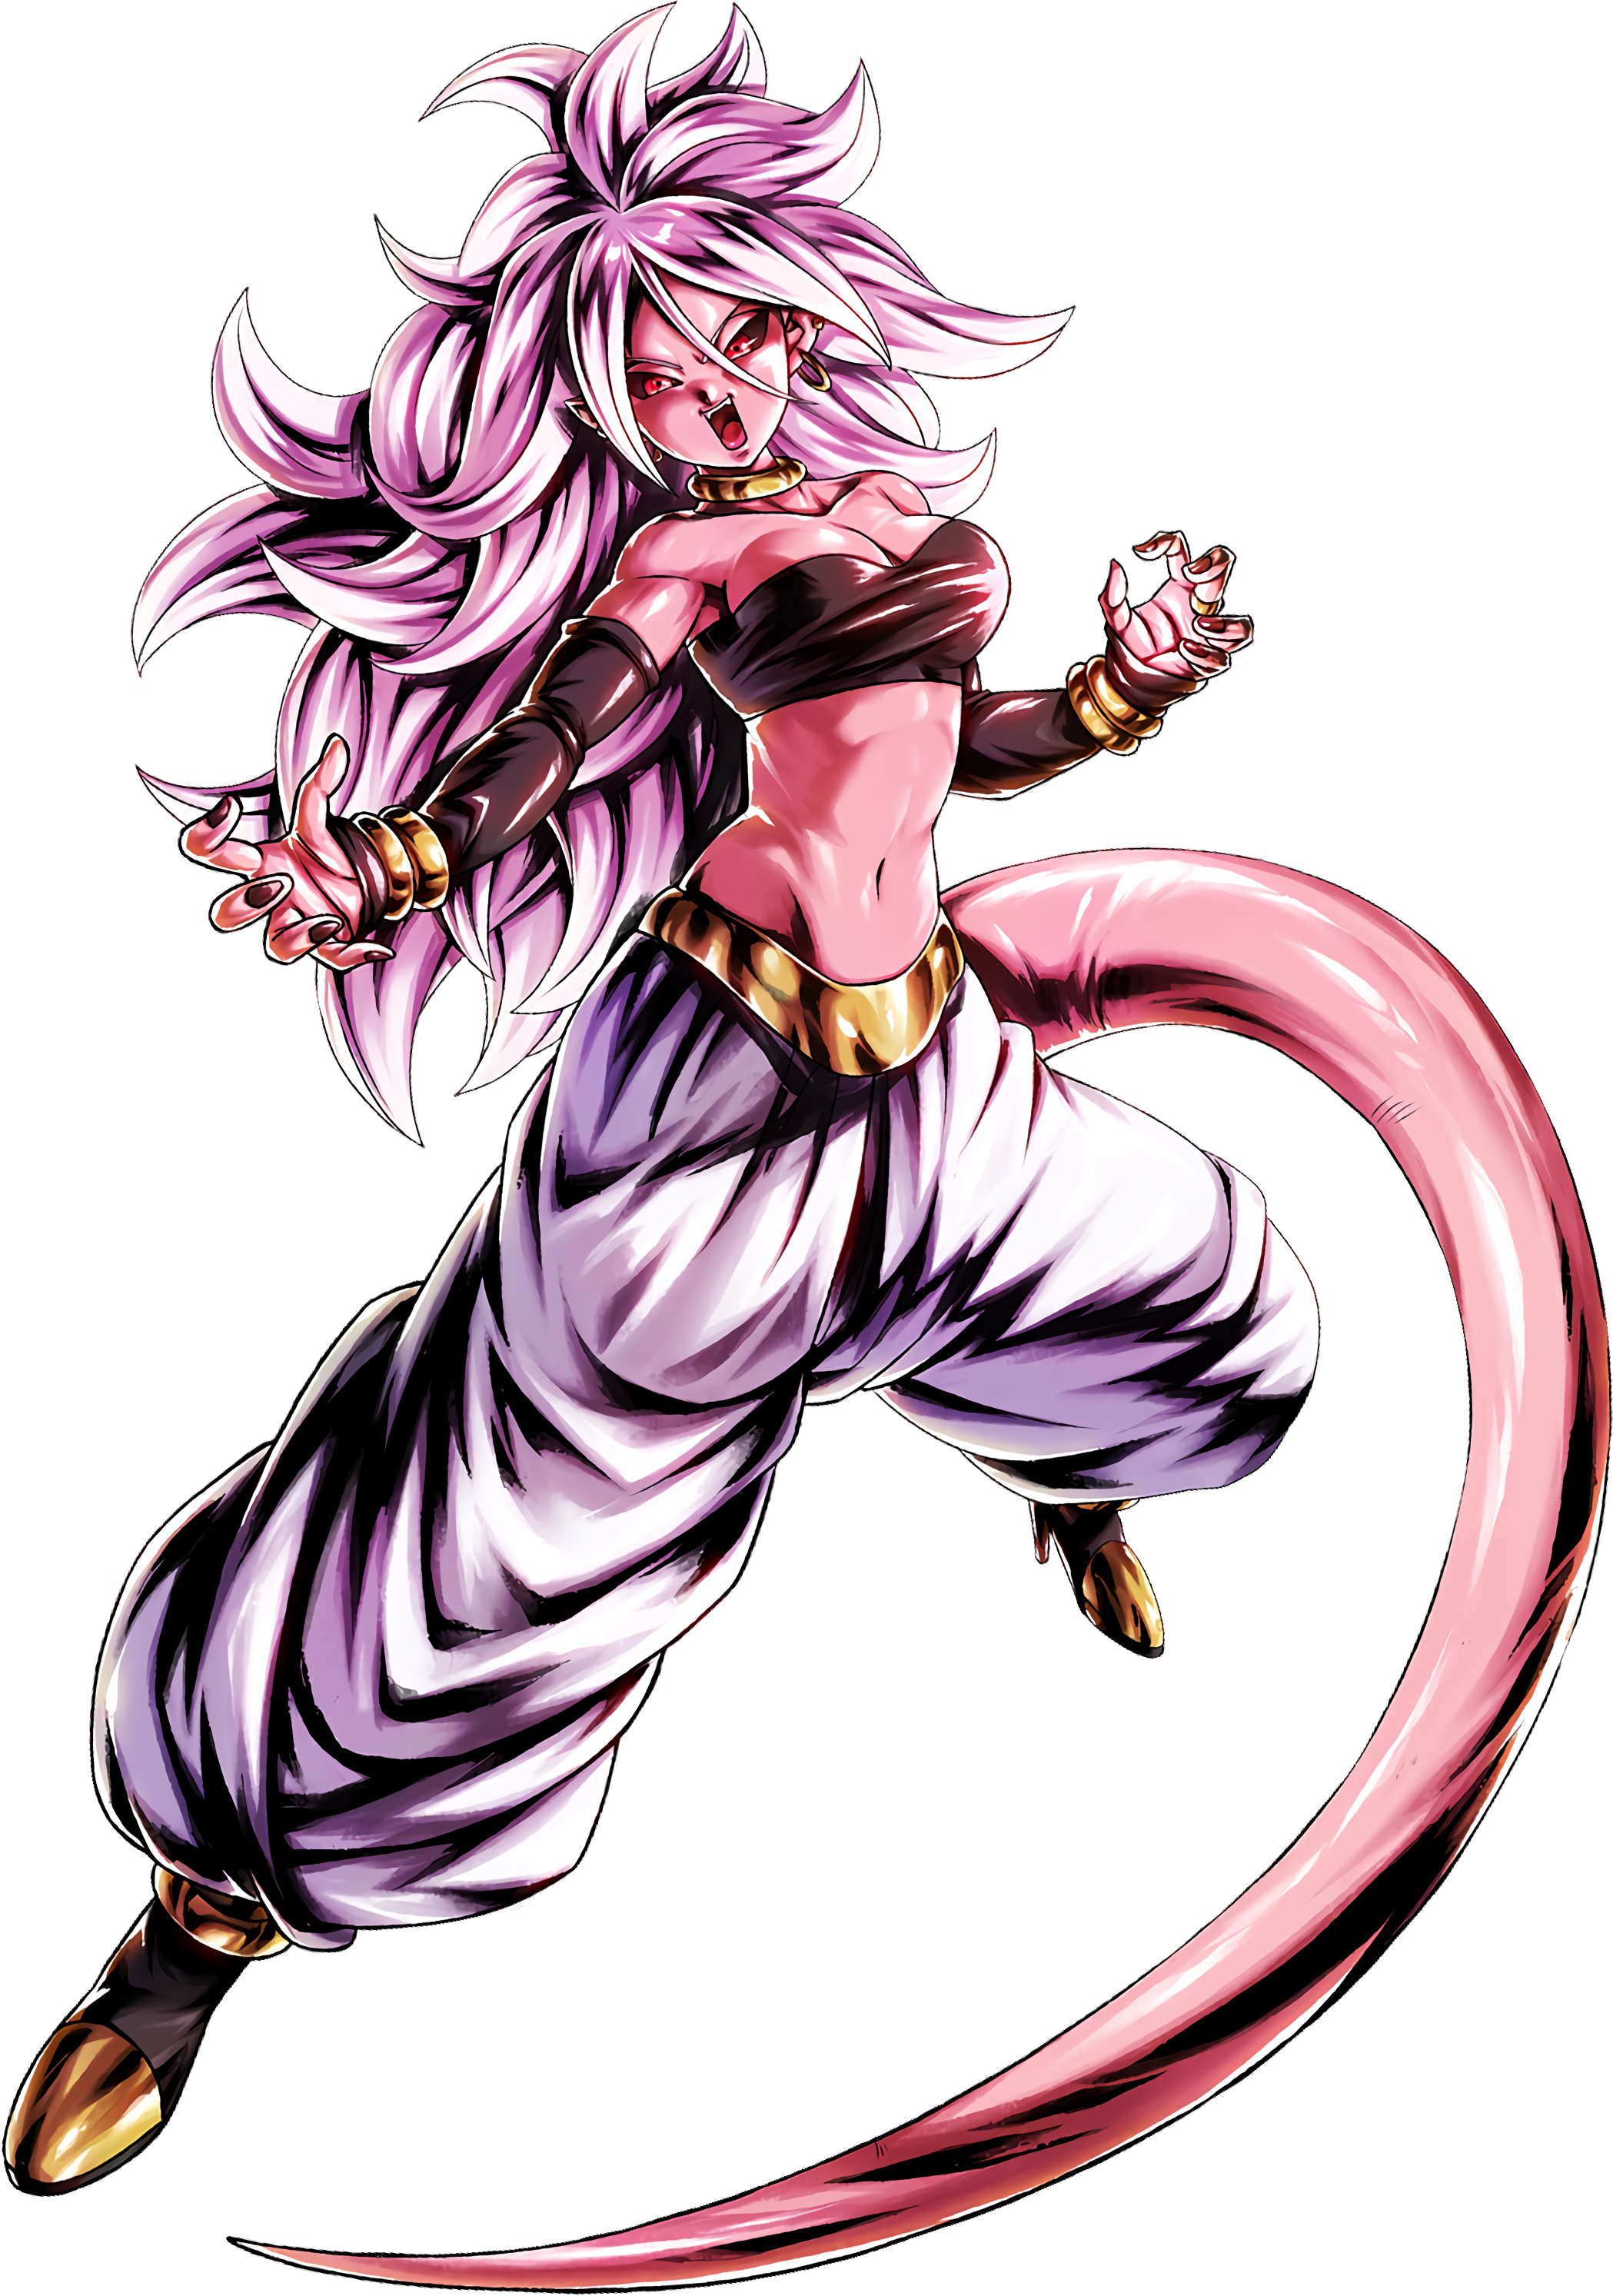 Android 21 (Age 779) (Dragon Ball Super) by NeoOllice on DeviantArt